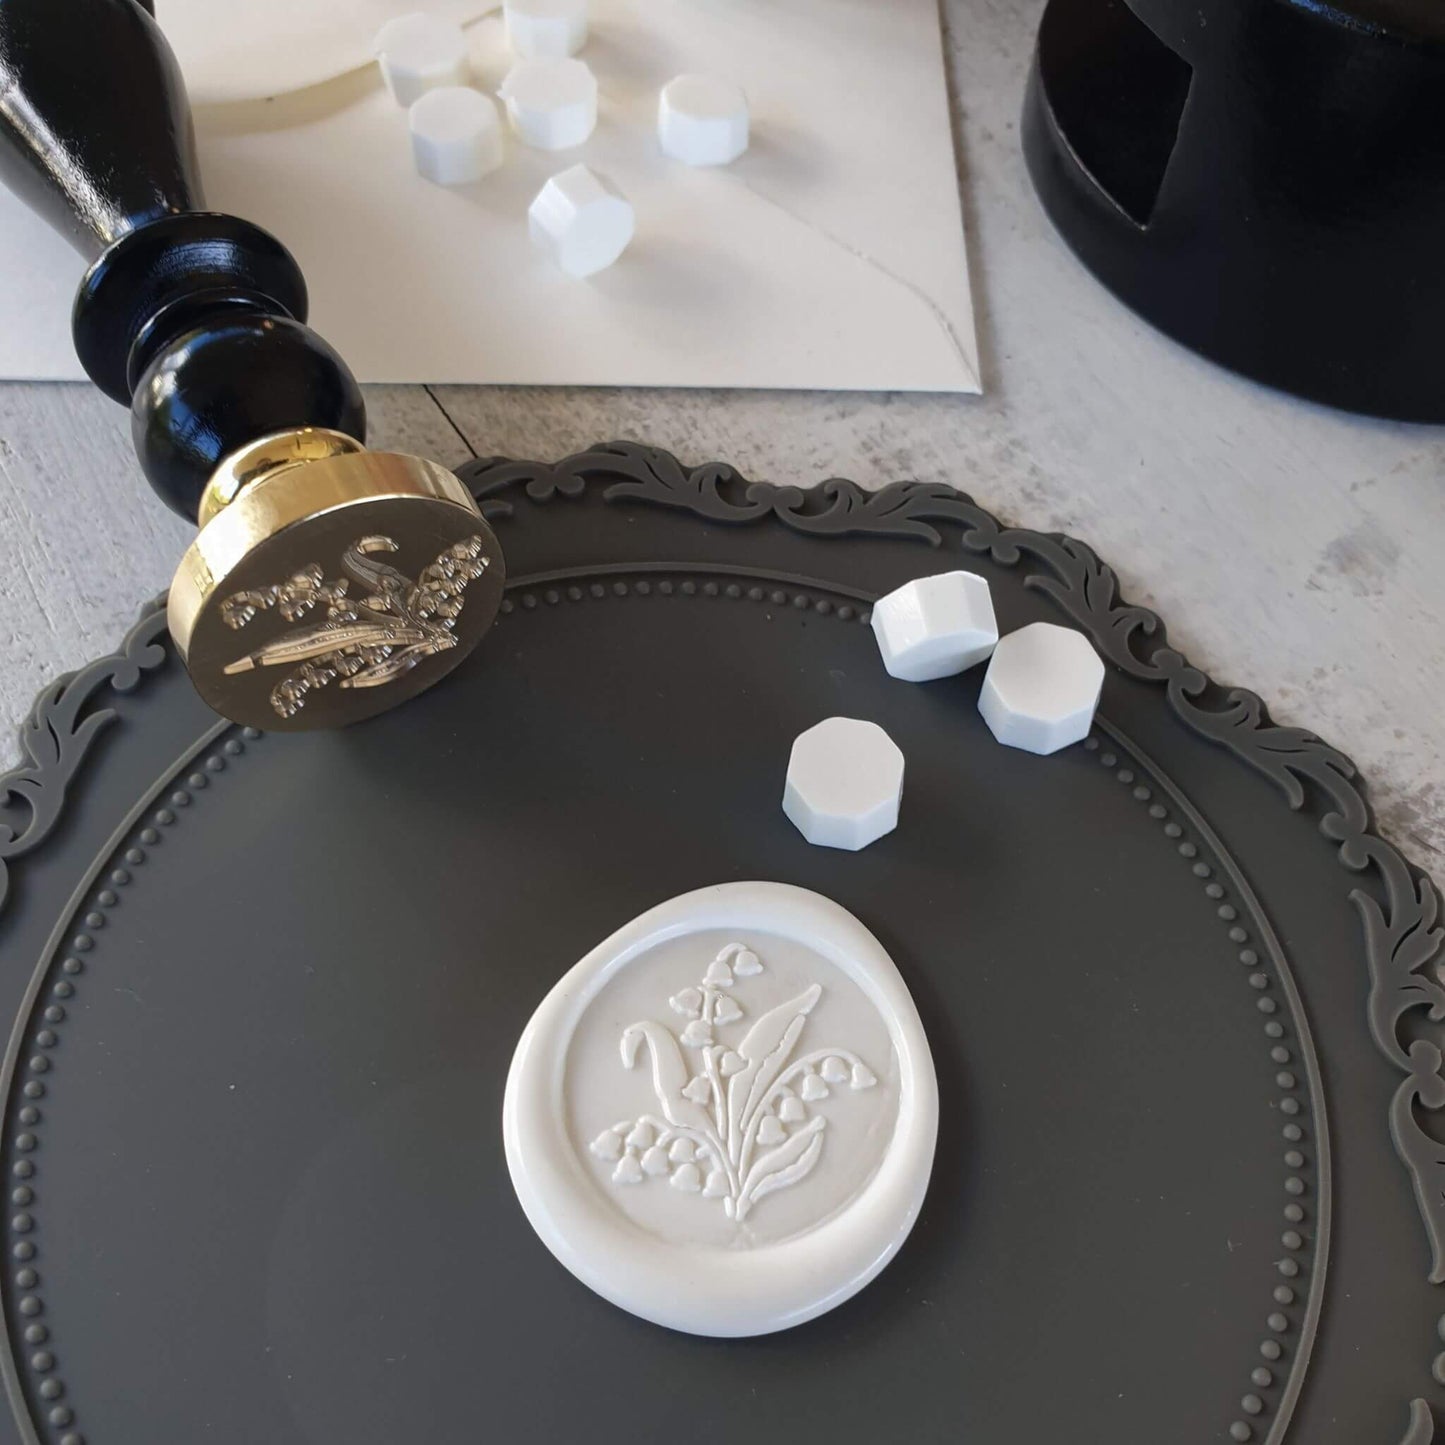 grey rococo wax seling mat in use with wax seal stamp, white floral wax seal and white wax sealing beads